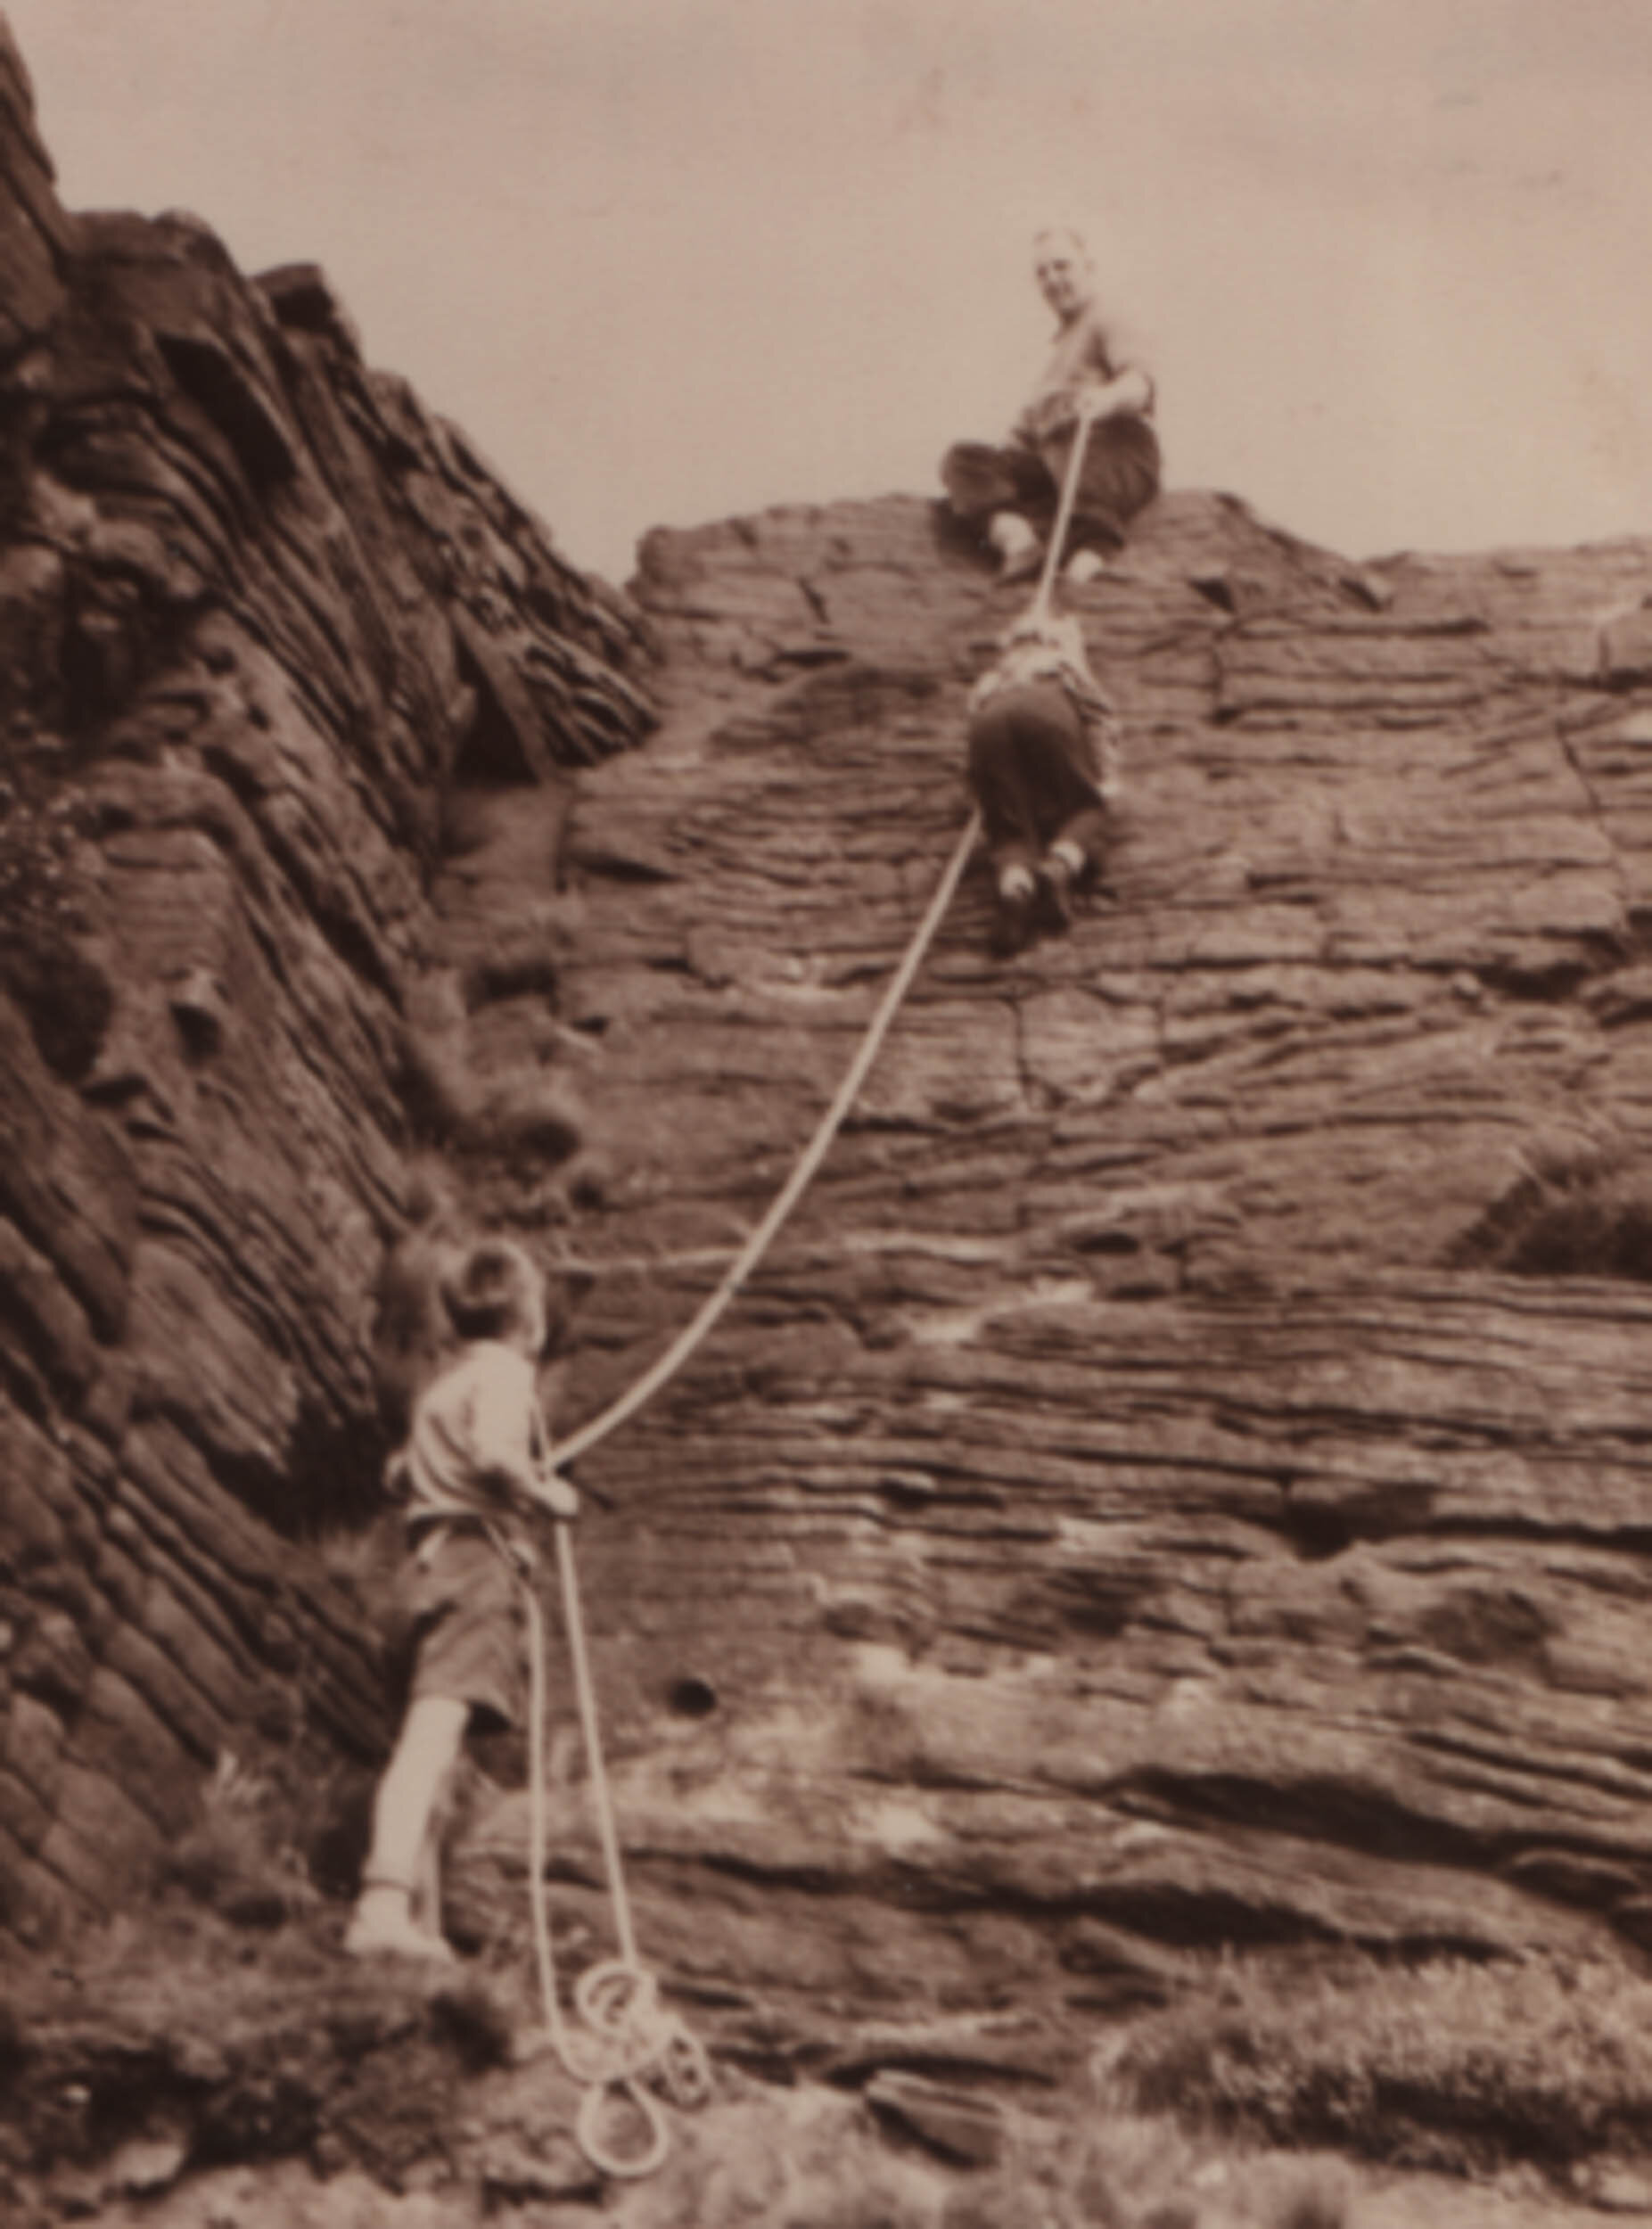 Sheila Cormack and family at Windgather Edge, Peak District, in 1952